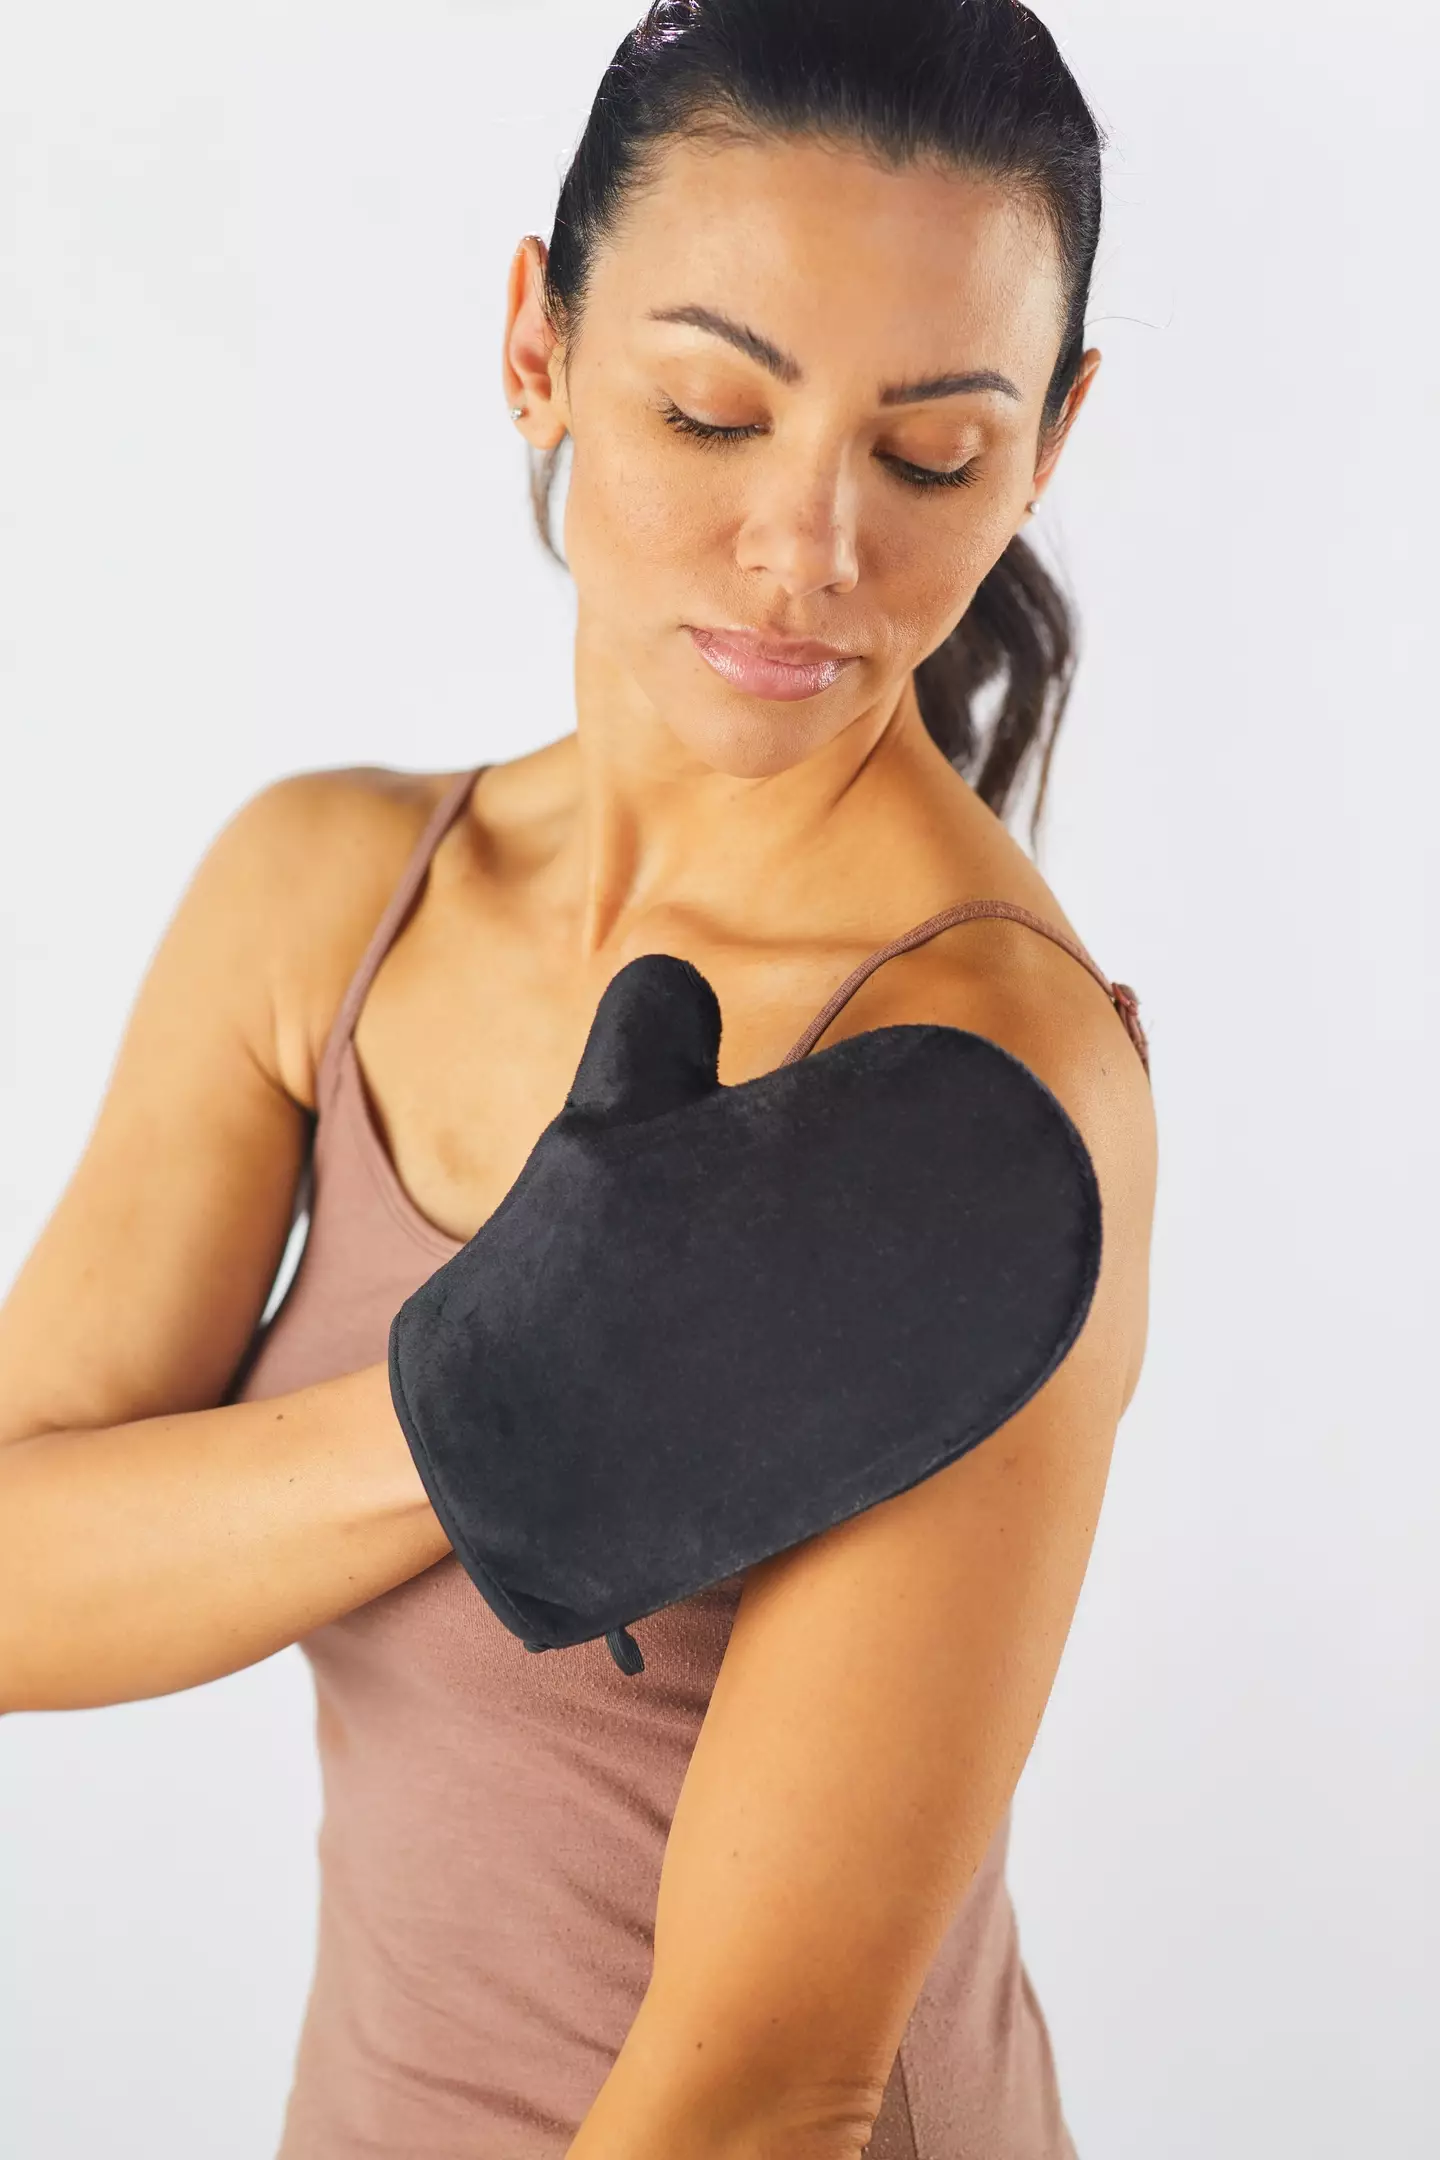 Look at that velvet mitten, Aldi's perfect instrument for applying fake tan.